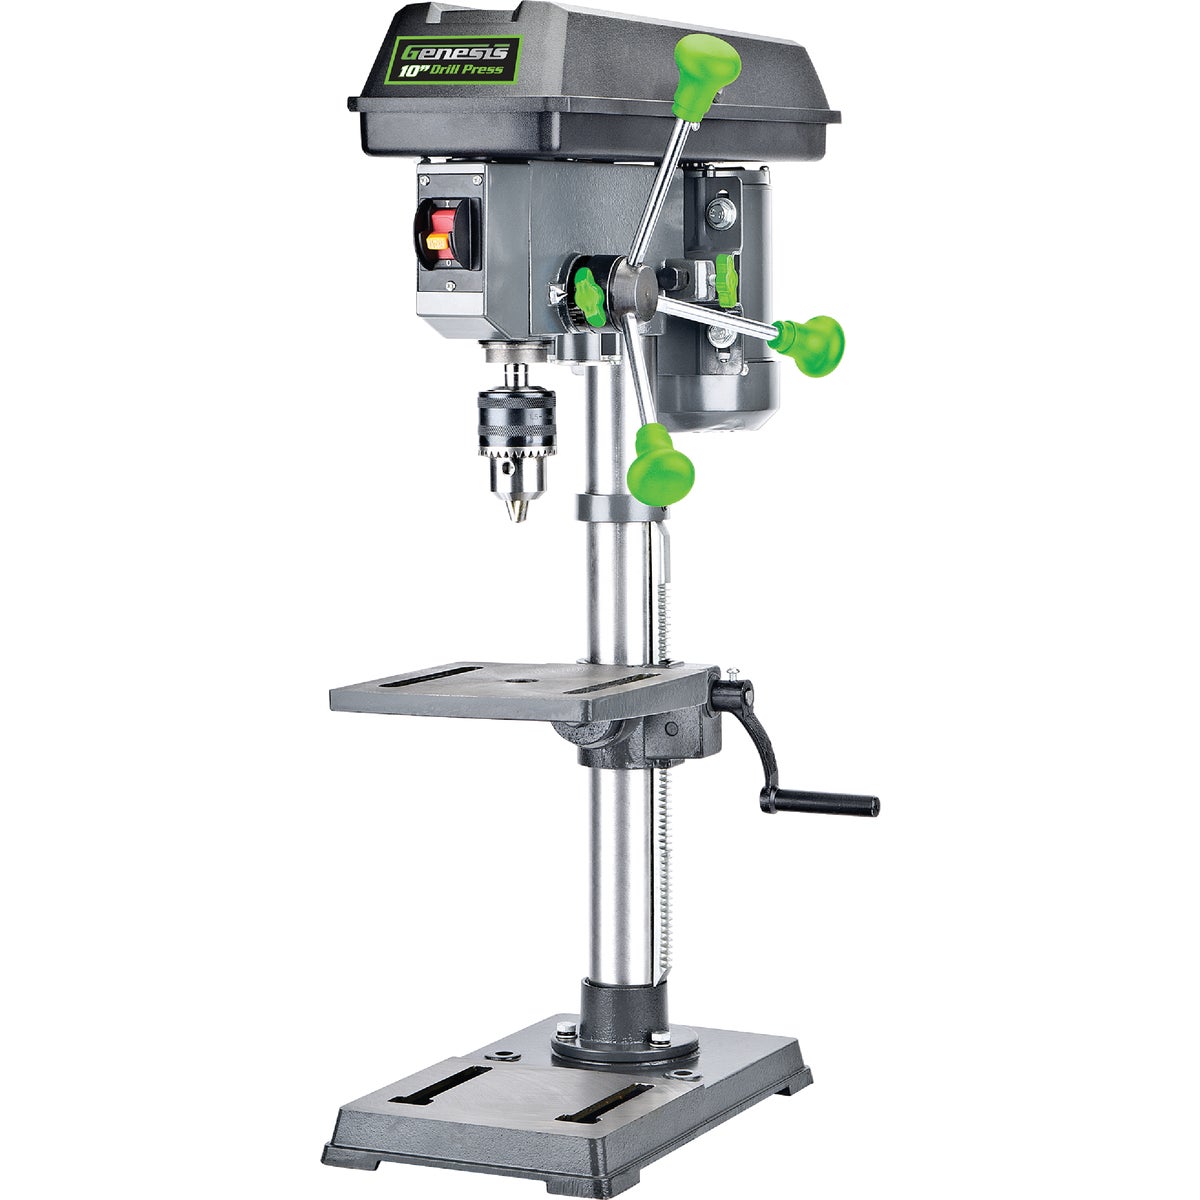 Item 365602, 10 In. 5-speed drill press. Features 4.